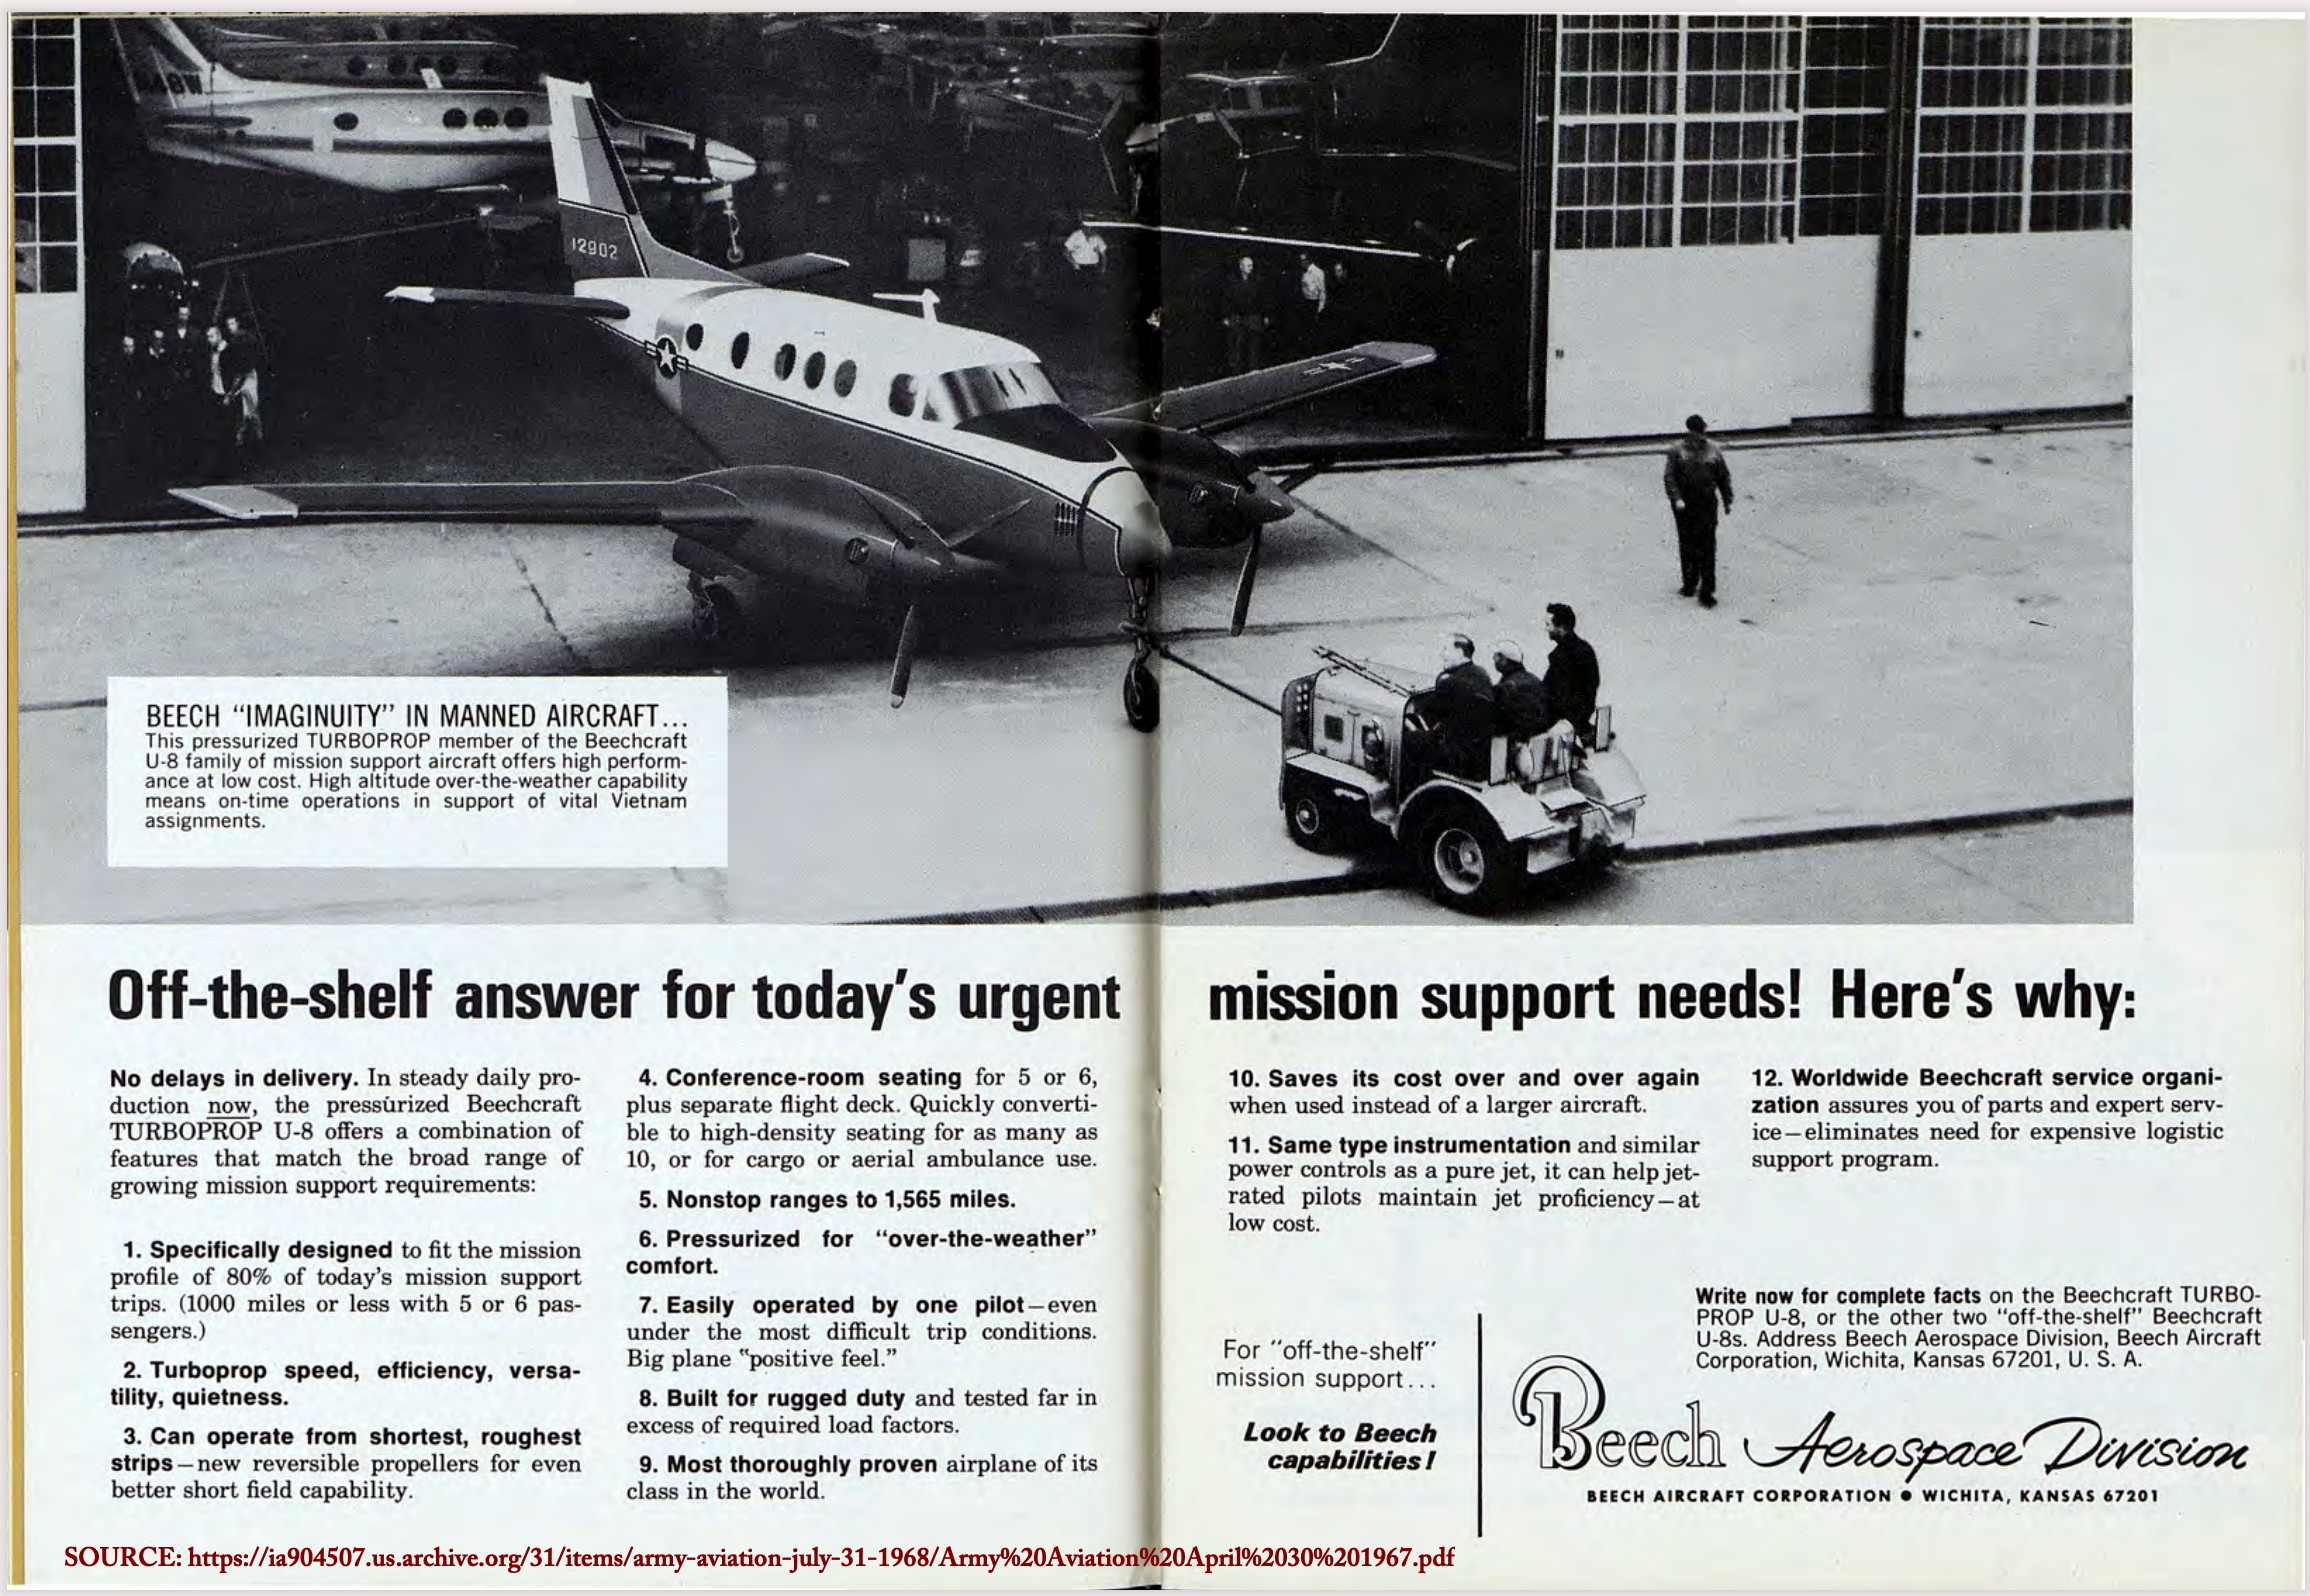 Army Aviation Magazine, Volumn 16, Number 4, page 10-11, 30 April 1967